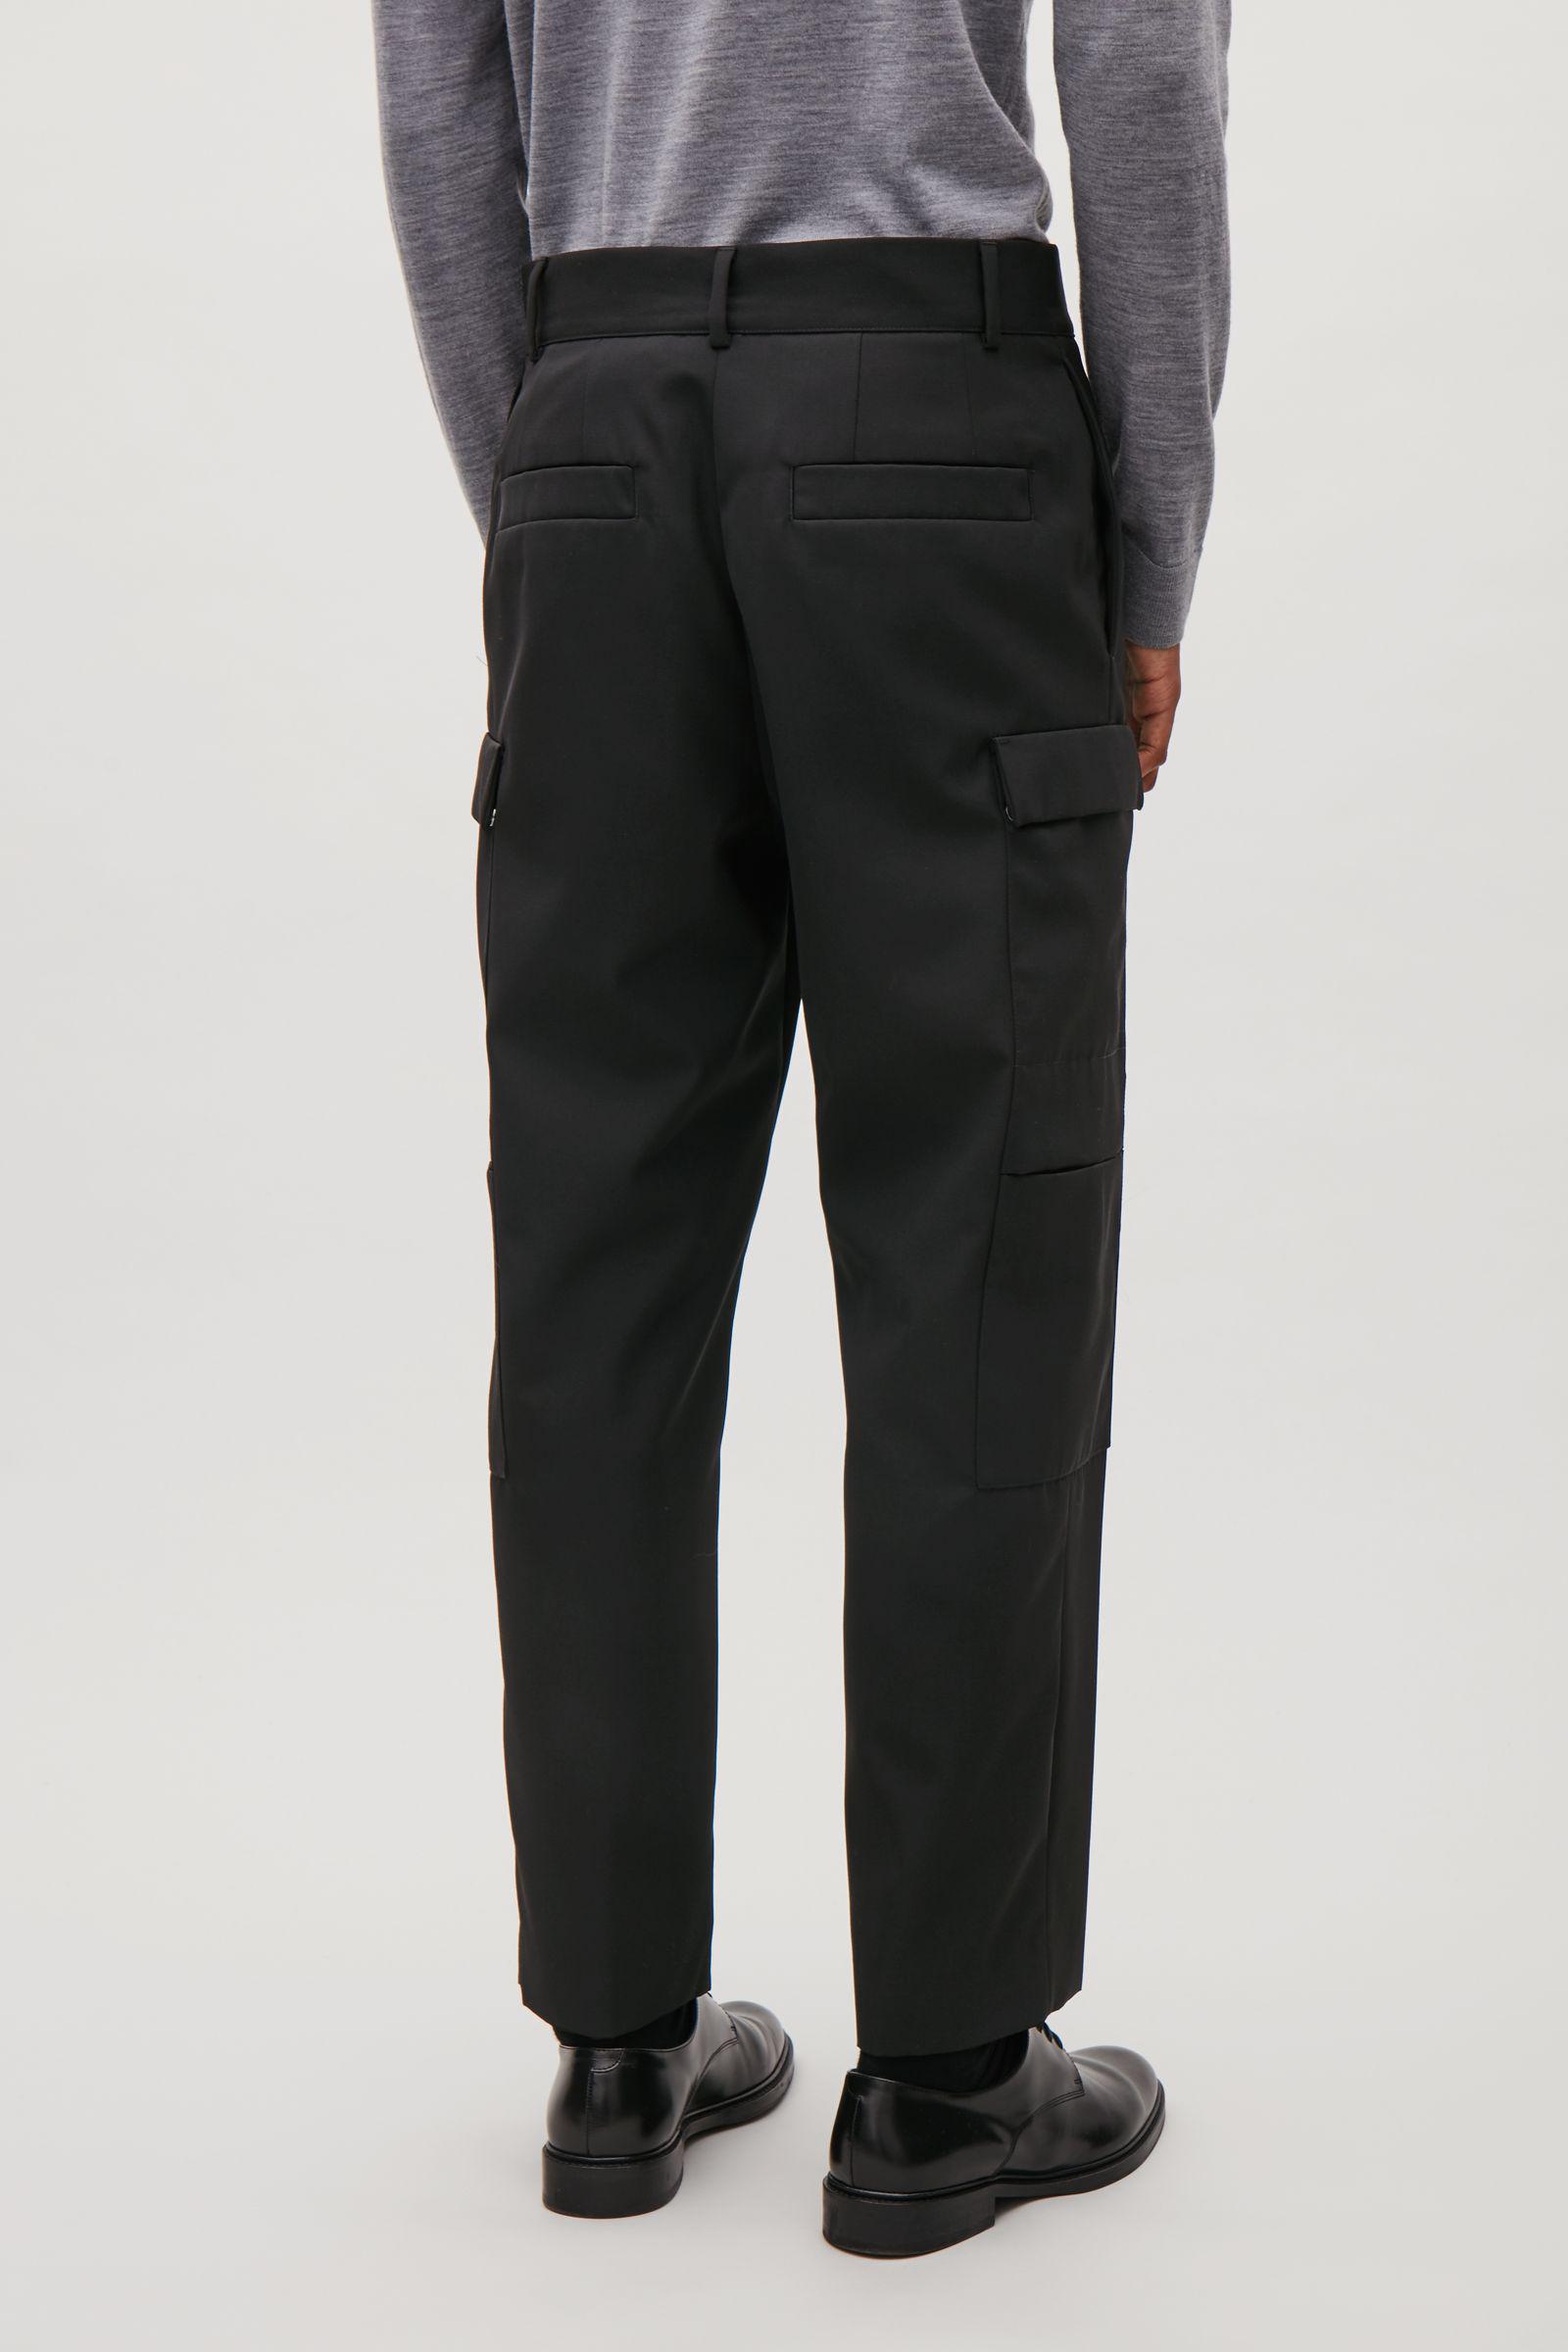 COS Cargo Trousers in Black for Men | Lyst